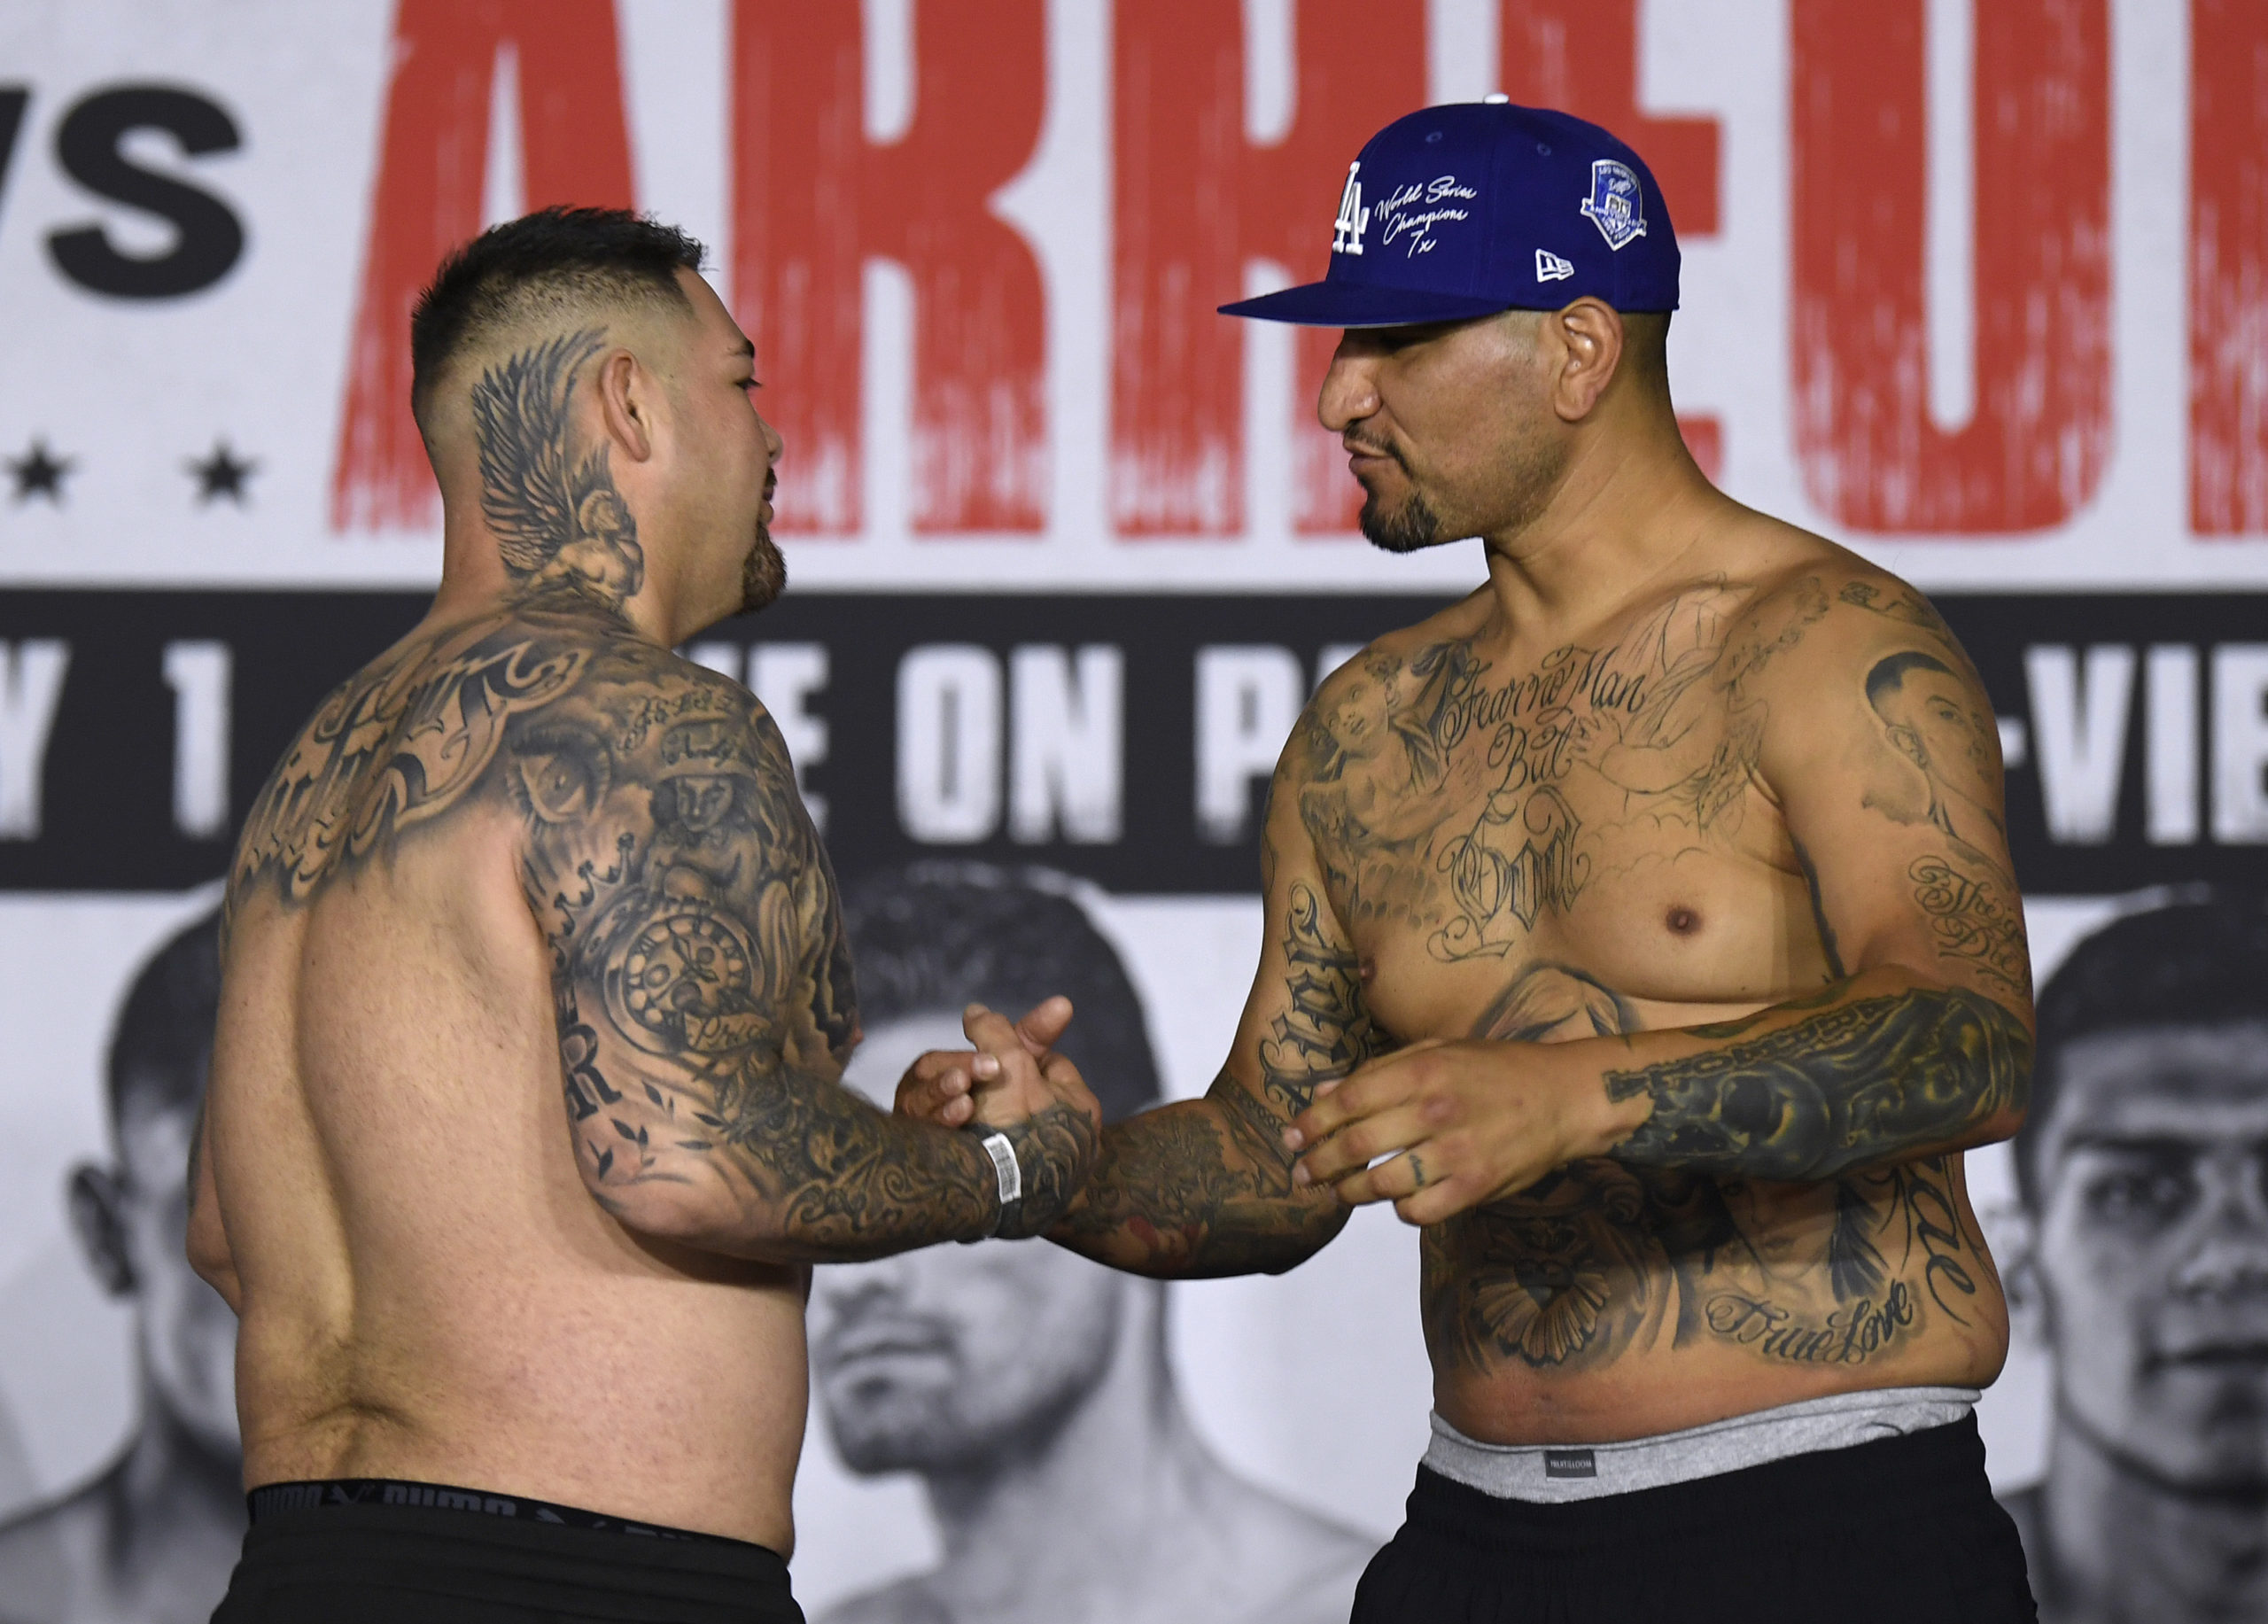 Andy Ruiz vs Chris Arreola Full Fight Video Live Streaming On Which Channel...